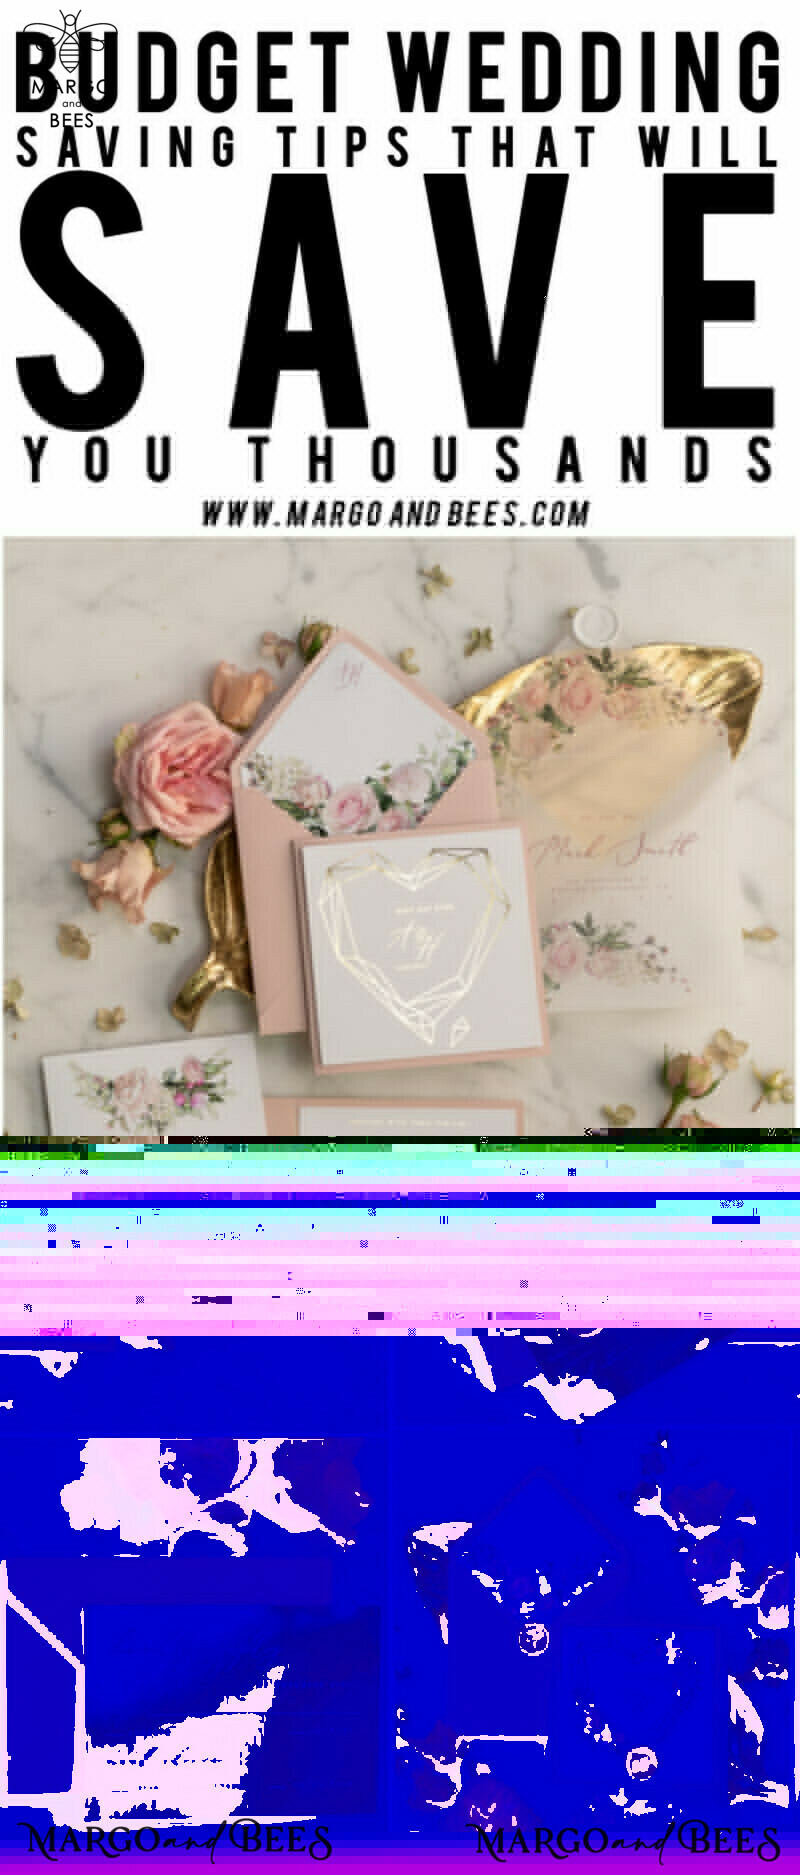 Glamorous Gold Foil Wedding Invitations with a Luxury Golden Shine: Introducing our Elegant Blush Pink Wedding Cards in a Bespoke Floral Invitation Suite-15